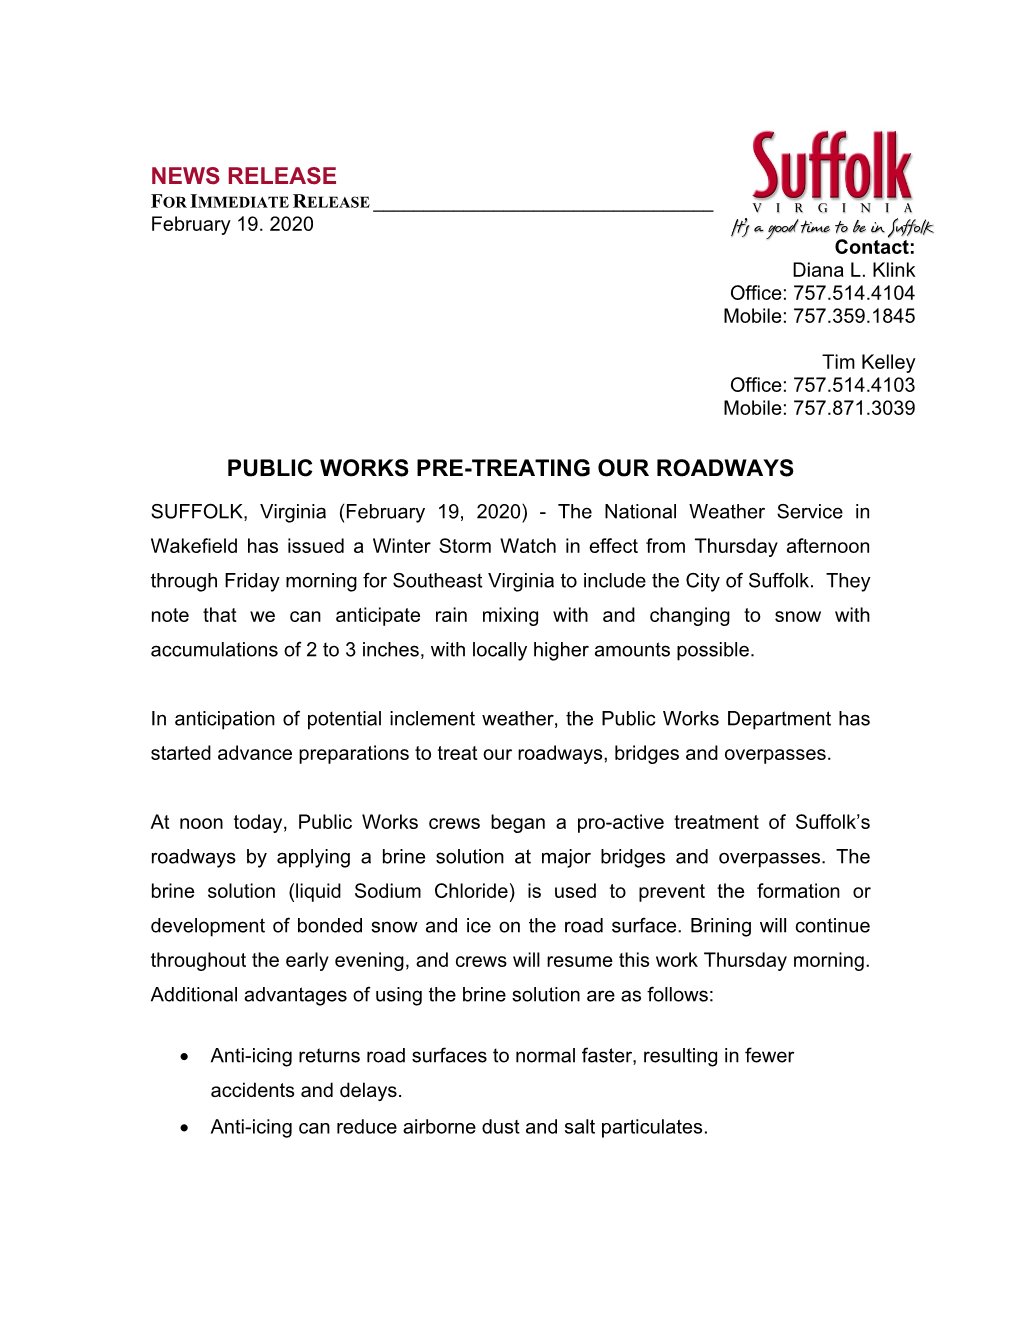 News Release Public Works Pre-Treating Our Roadways